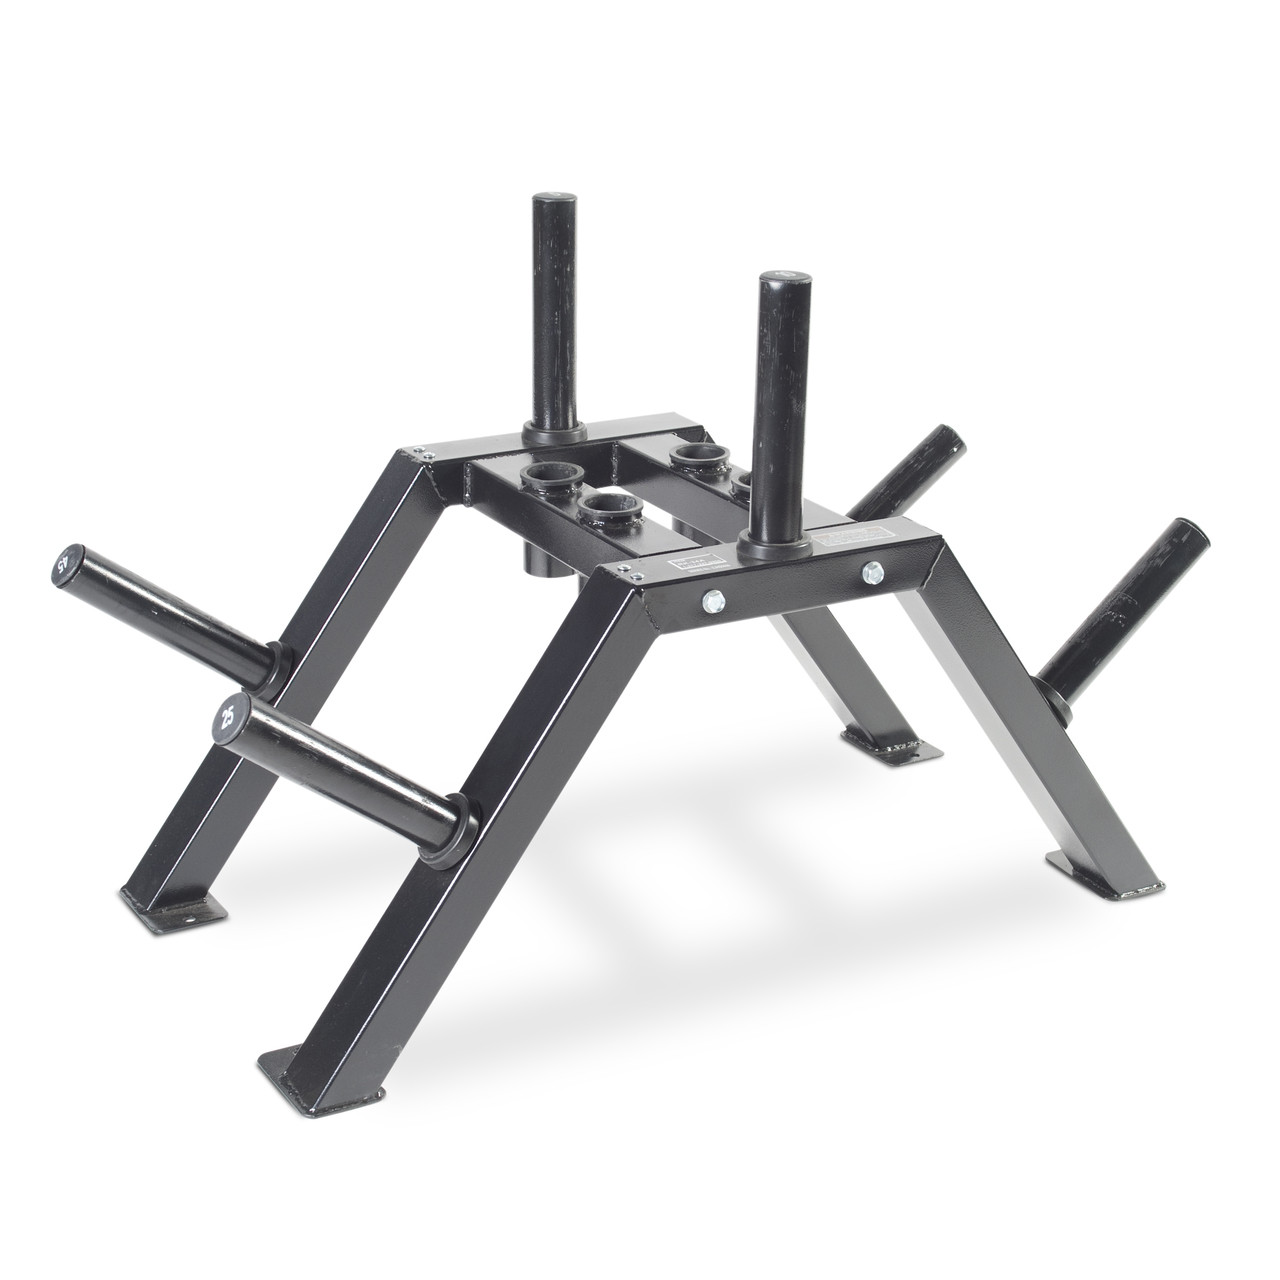 CAP Barbell Olympic 2-Inch Plate and Bar Storage Rack